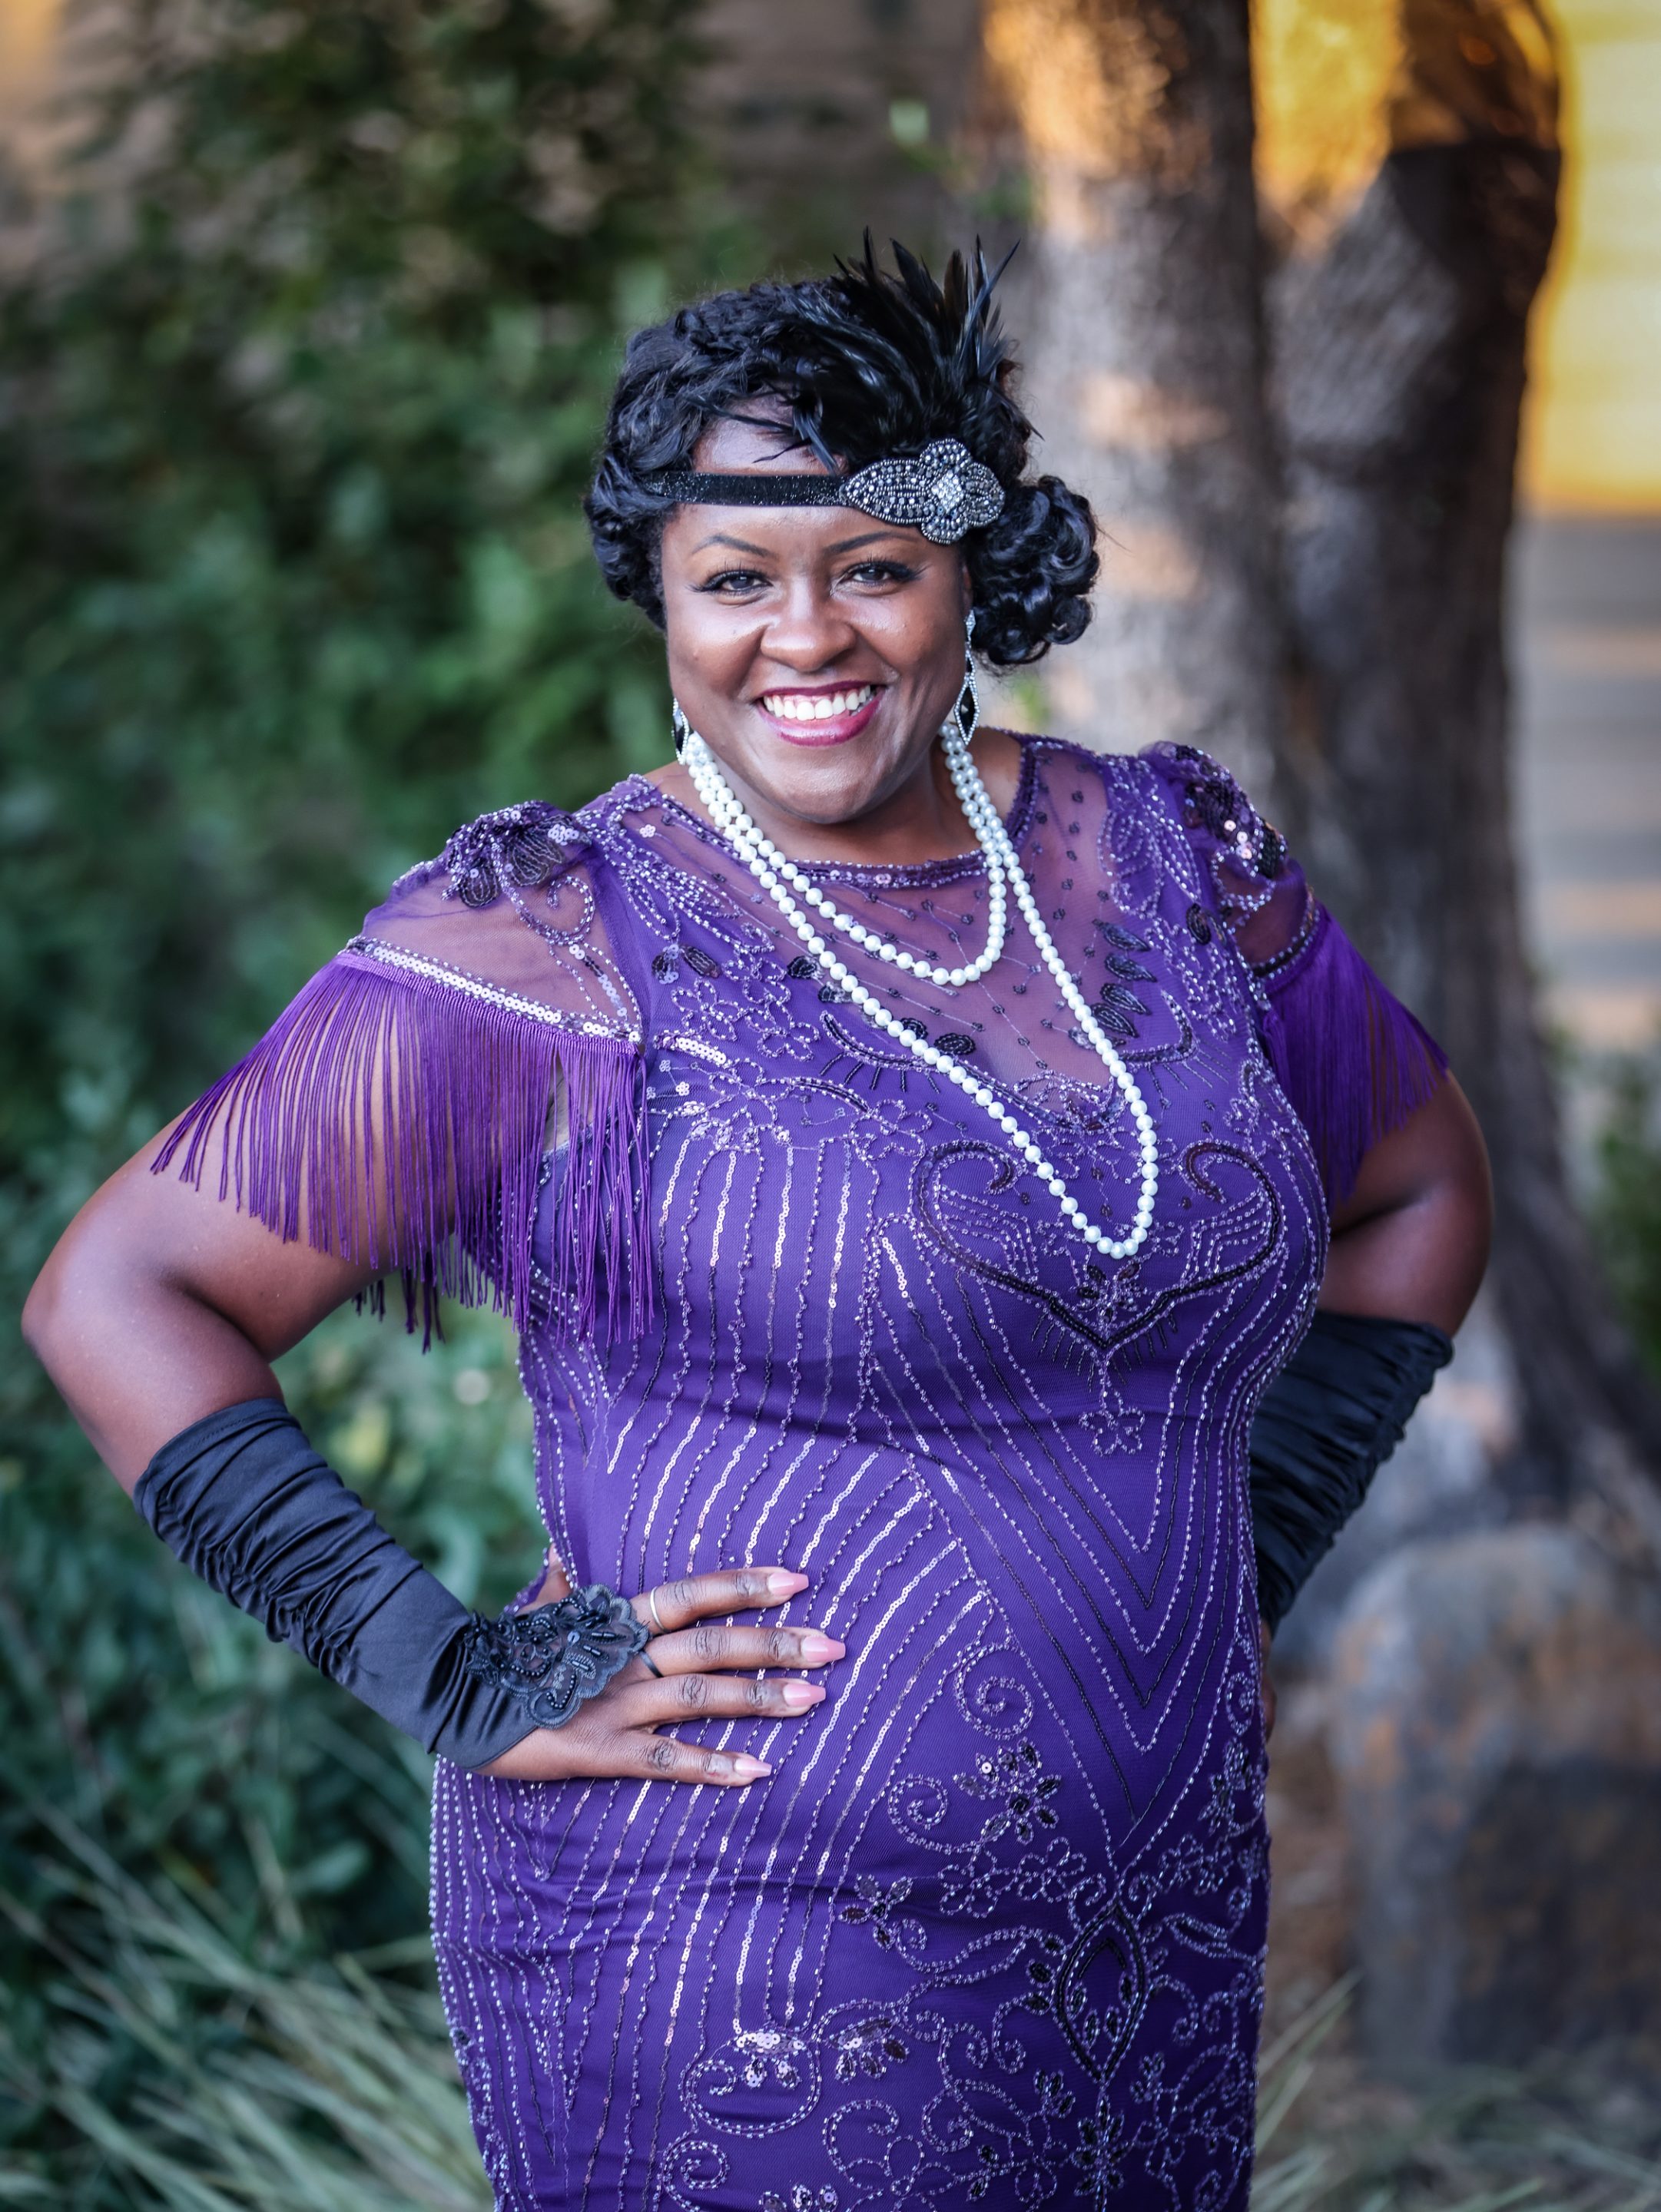 A woman in a purple dress posing for a photo at a Sonoma County non-profit organization event.